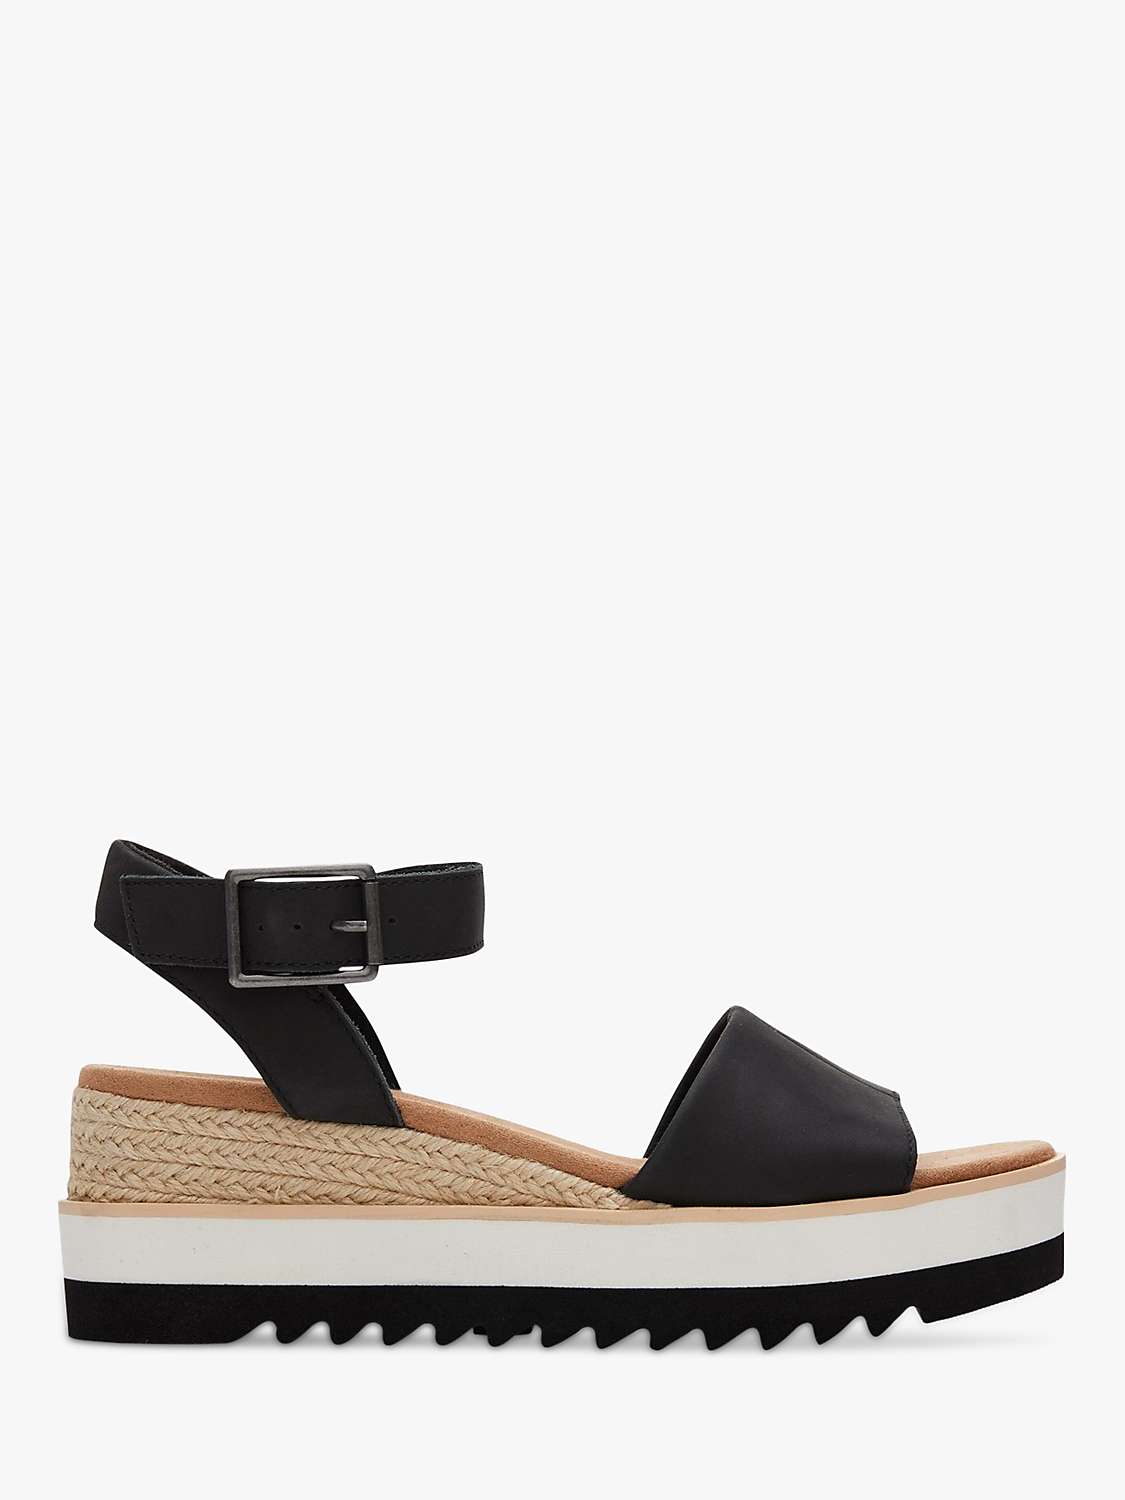 Buy TOMS Diana Wedge Leather Sandals Online at johnlewis.com